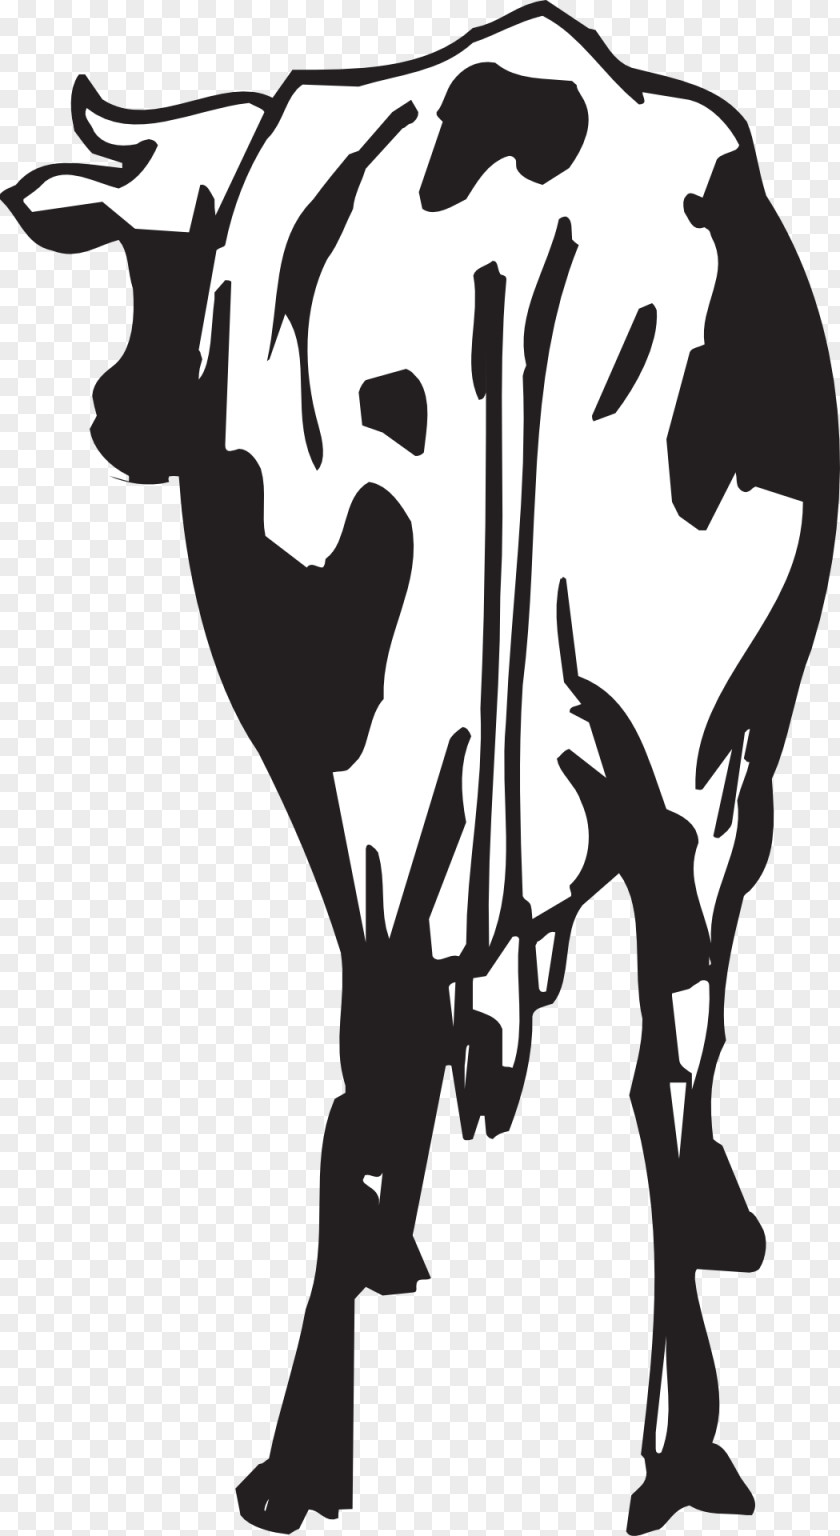 Milk Dairy Cattle Dressed In Wires Clip Art PNG